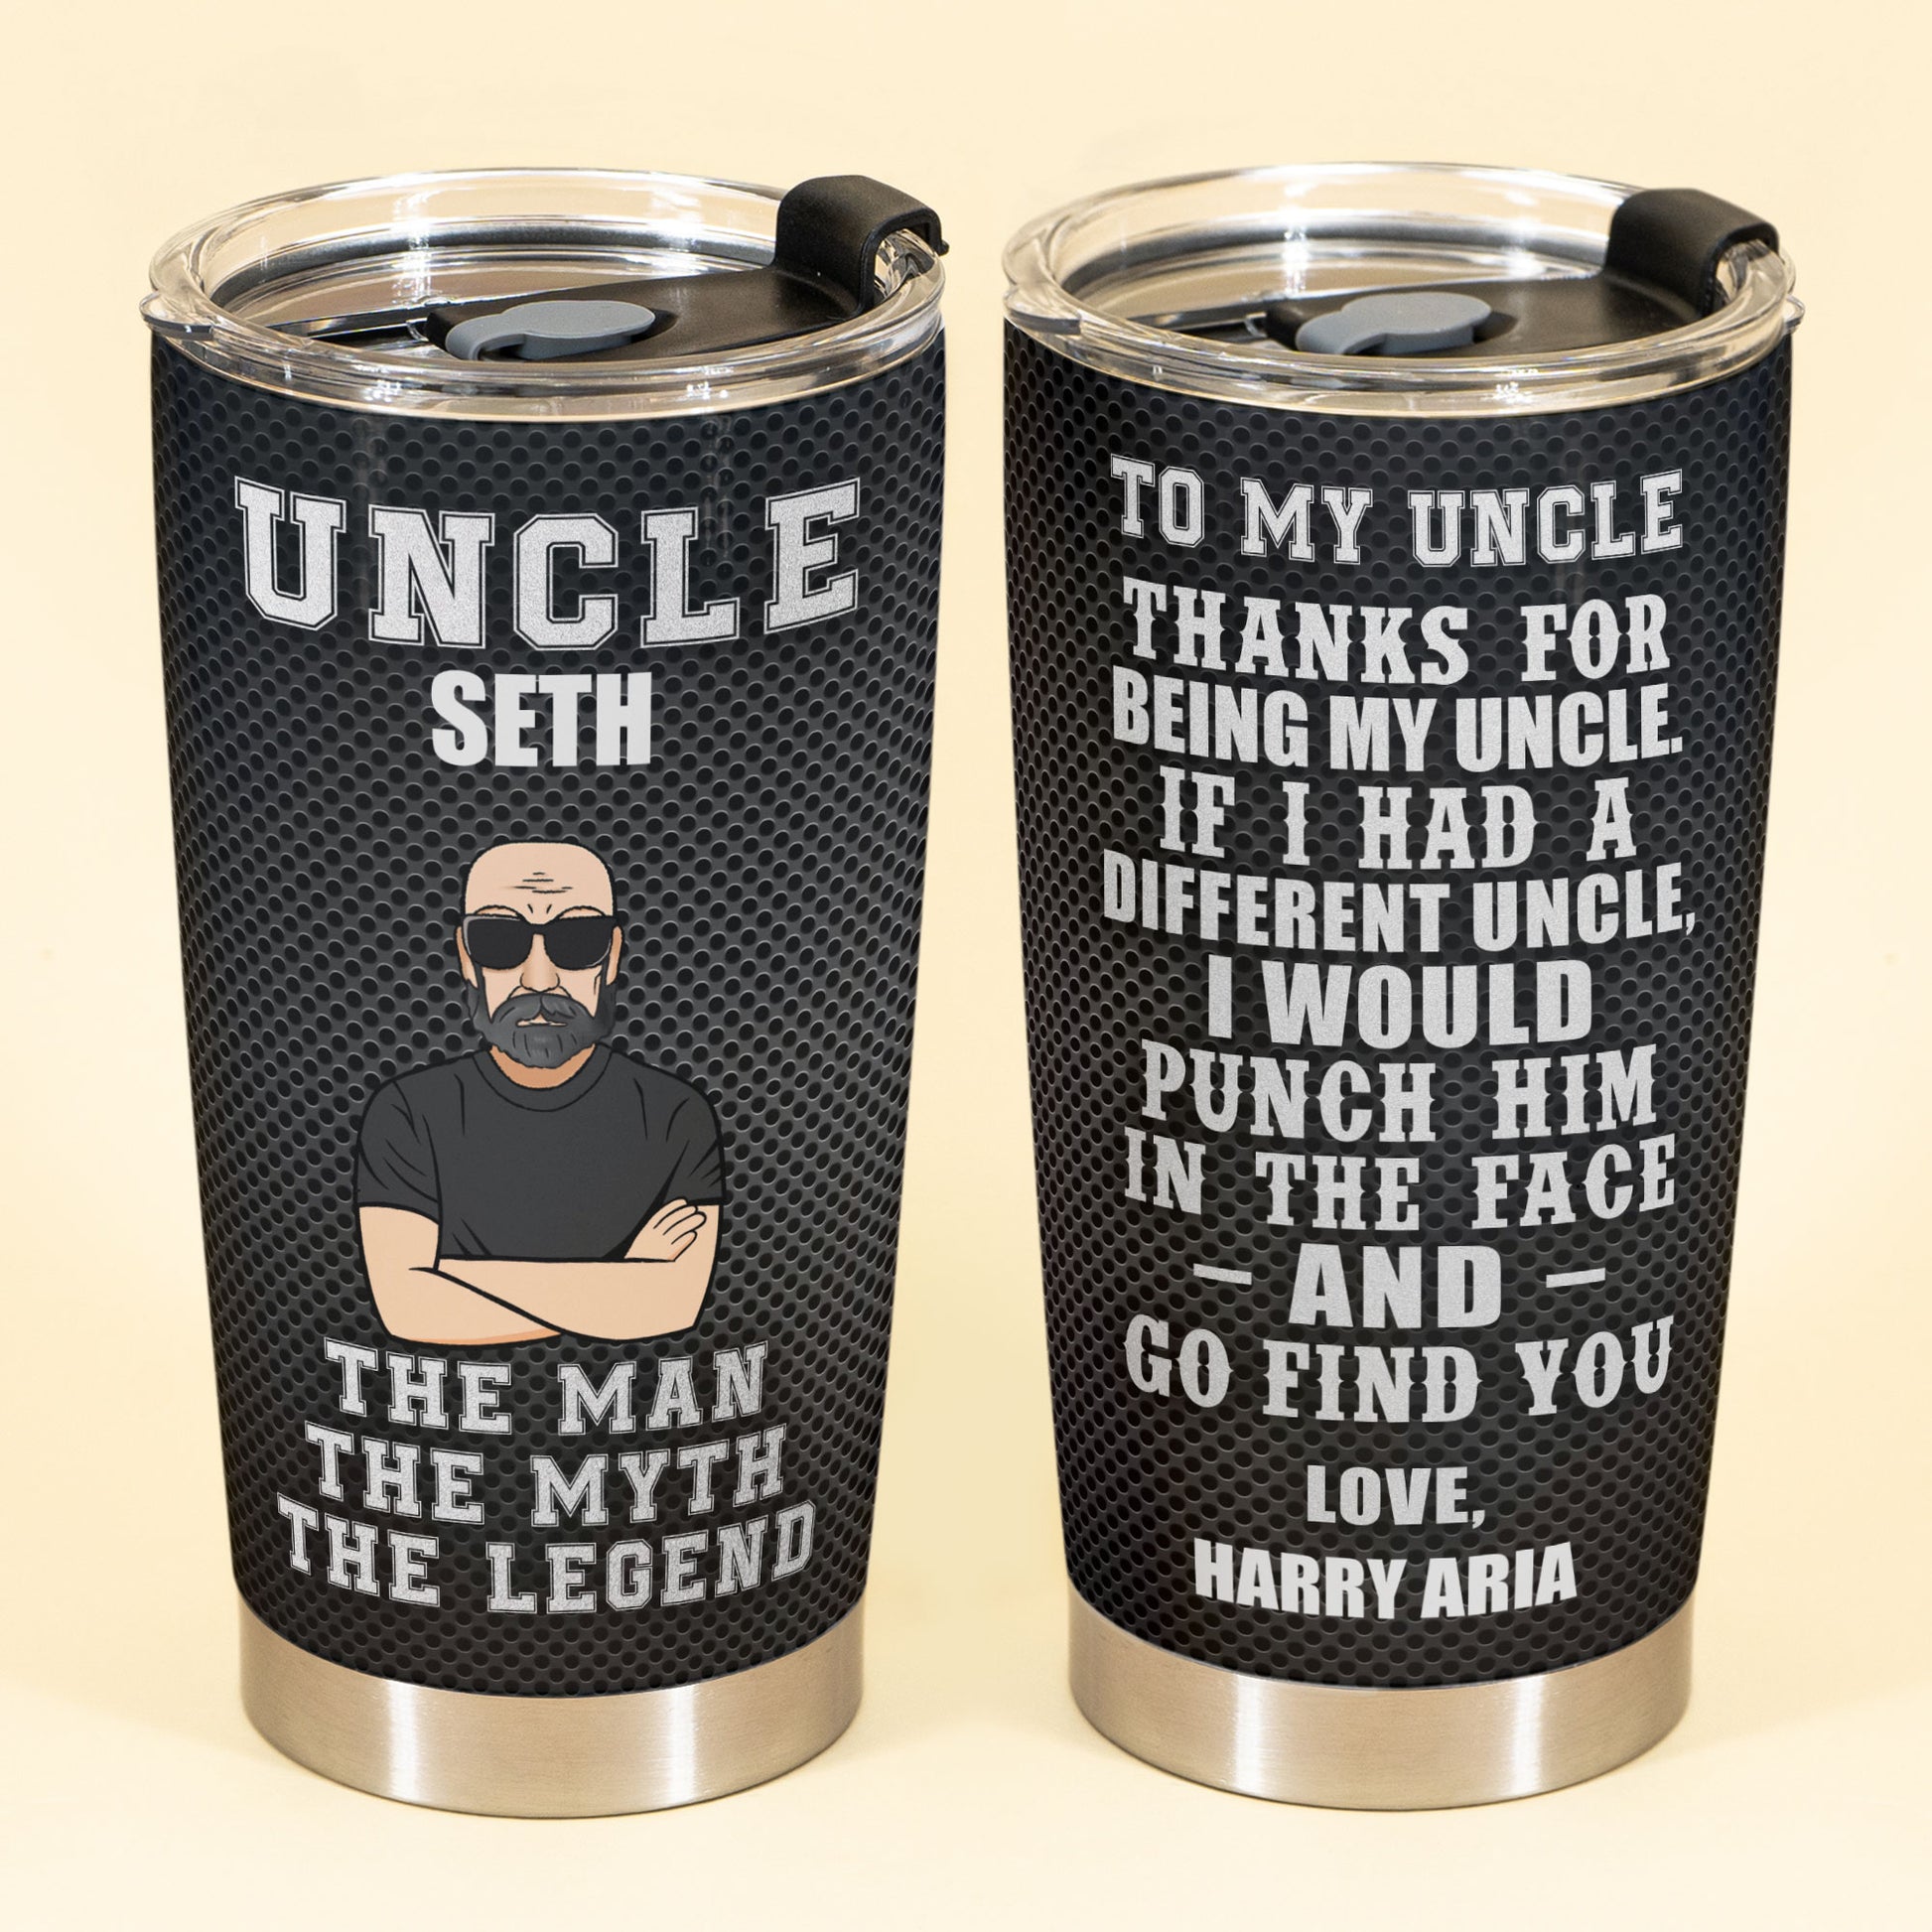 Thanks For Being My Uncle - Personalized Tumbler Cup - Gift For Uncle